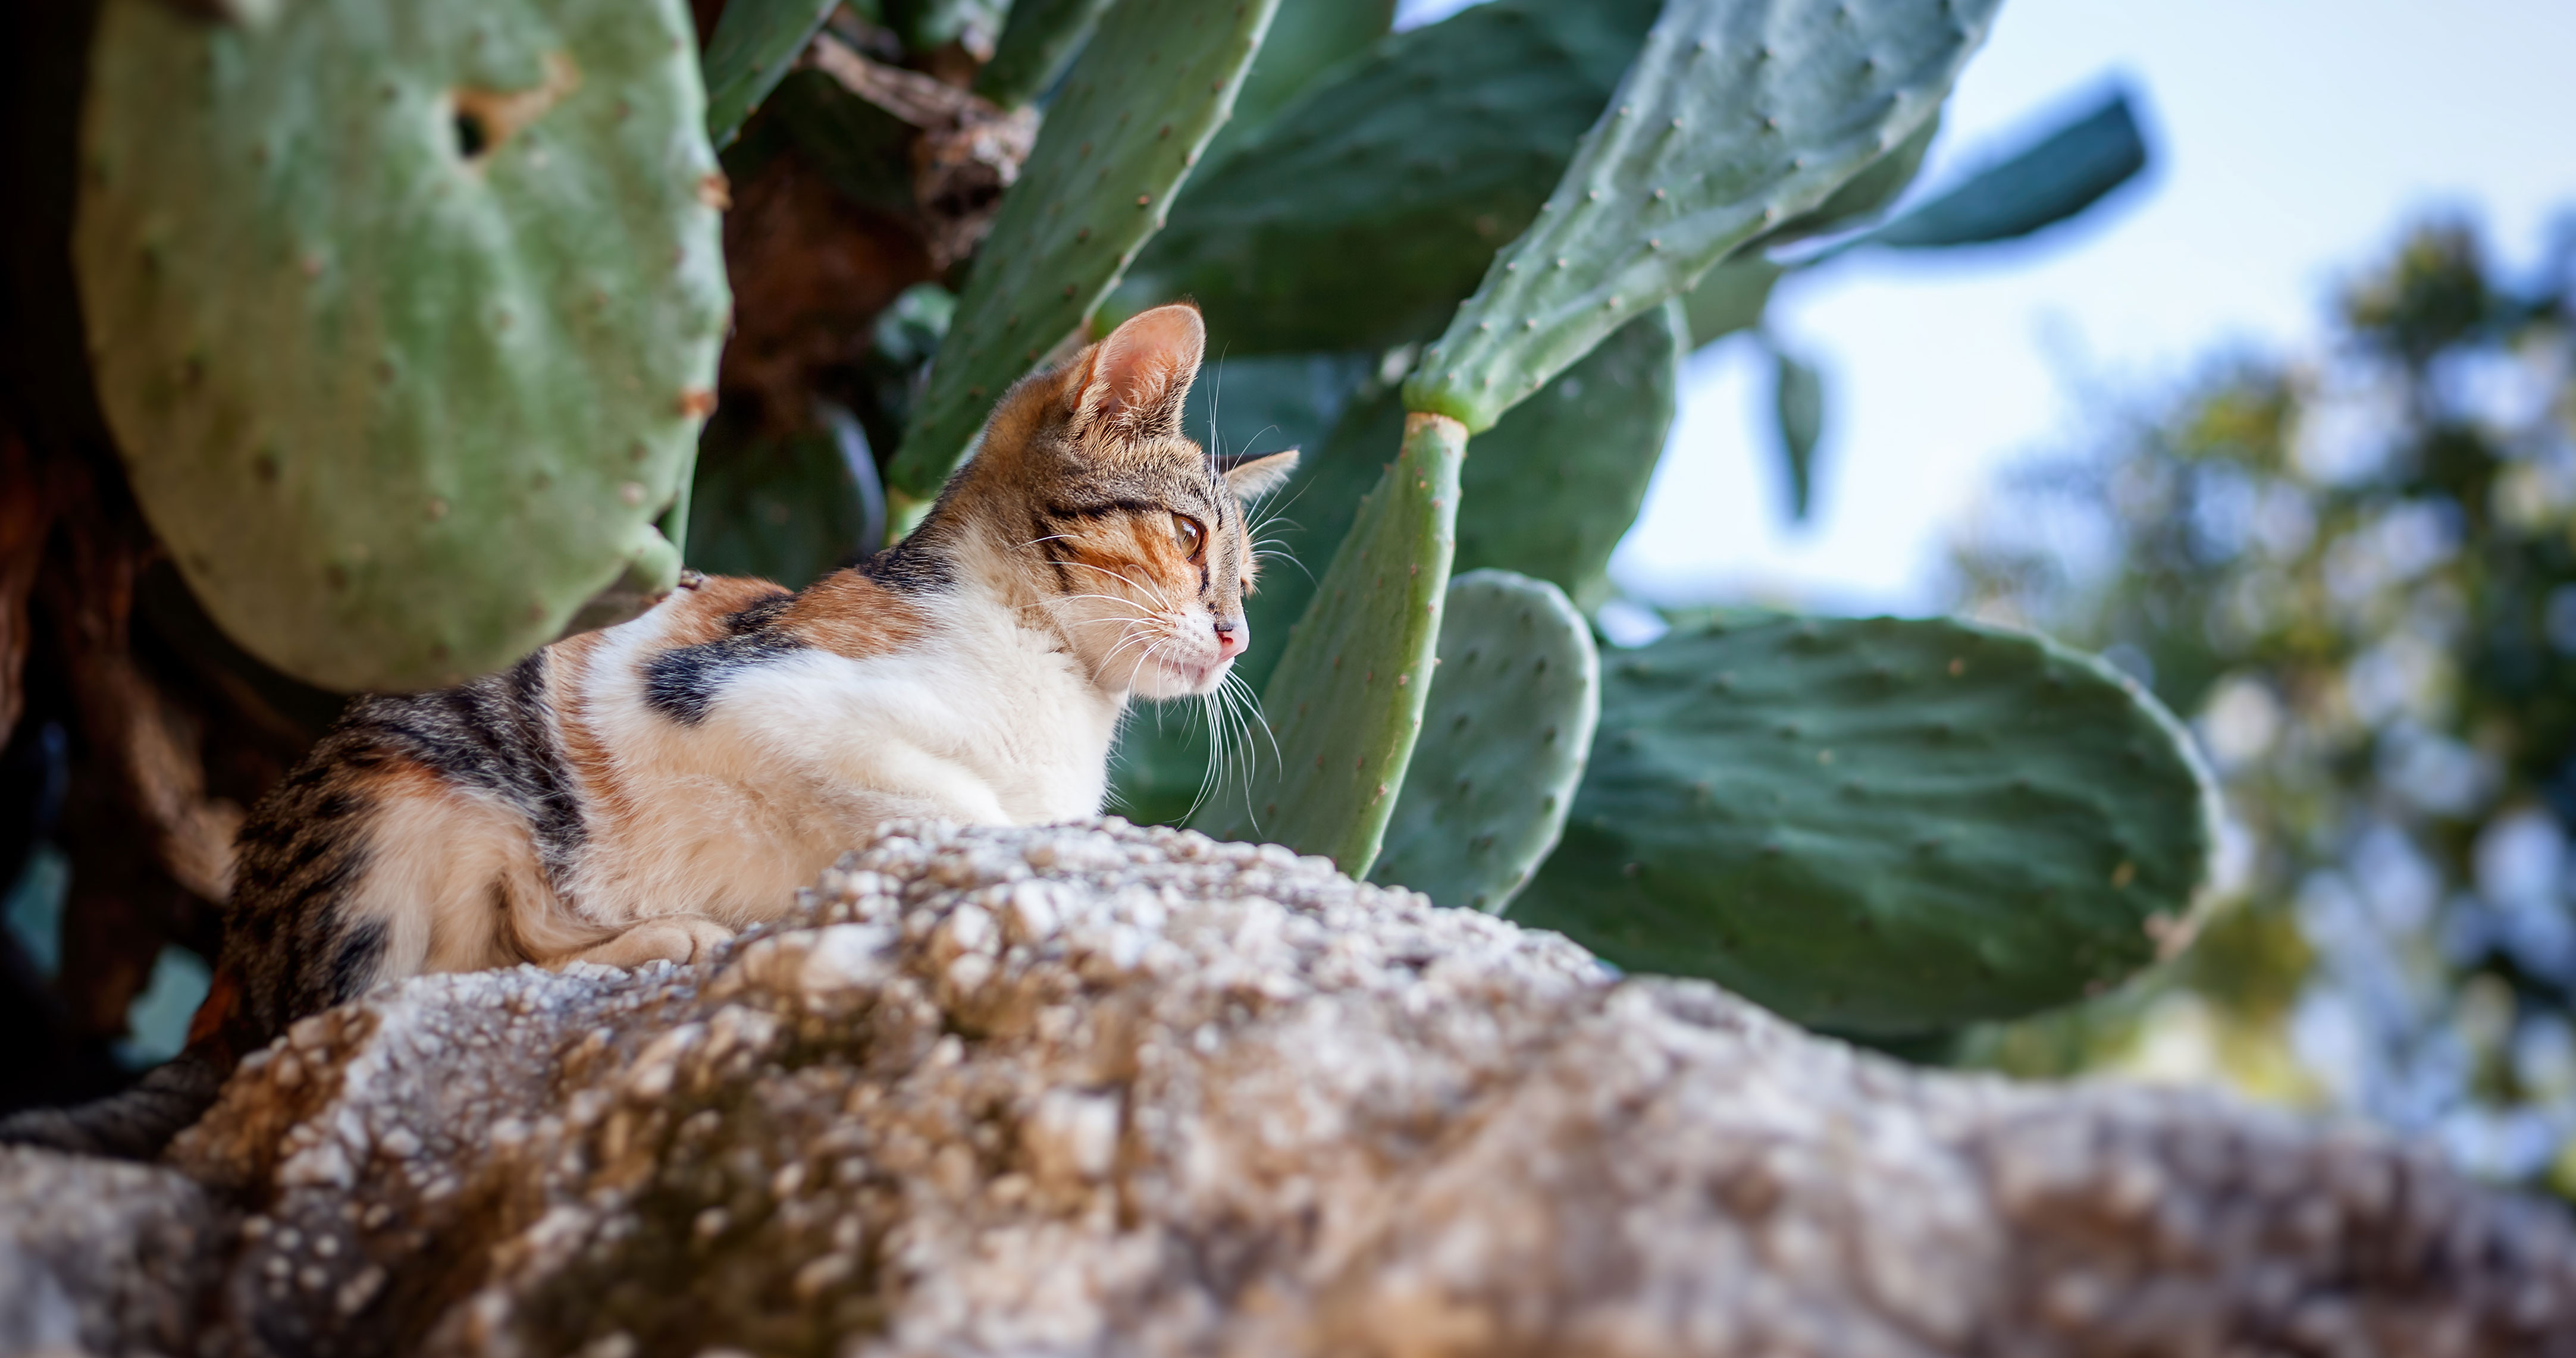 Cat sitting on a rock with cactus around it